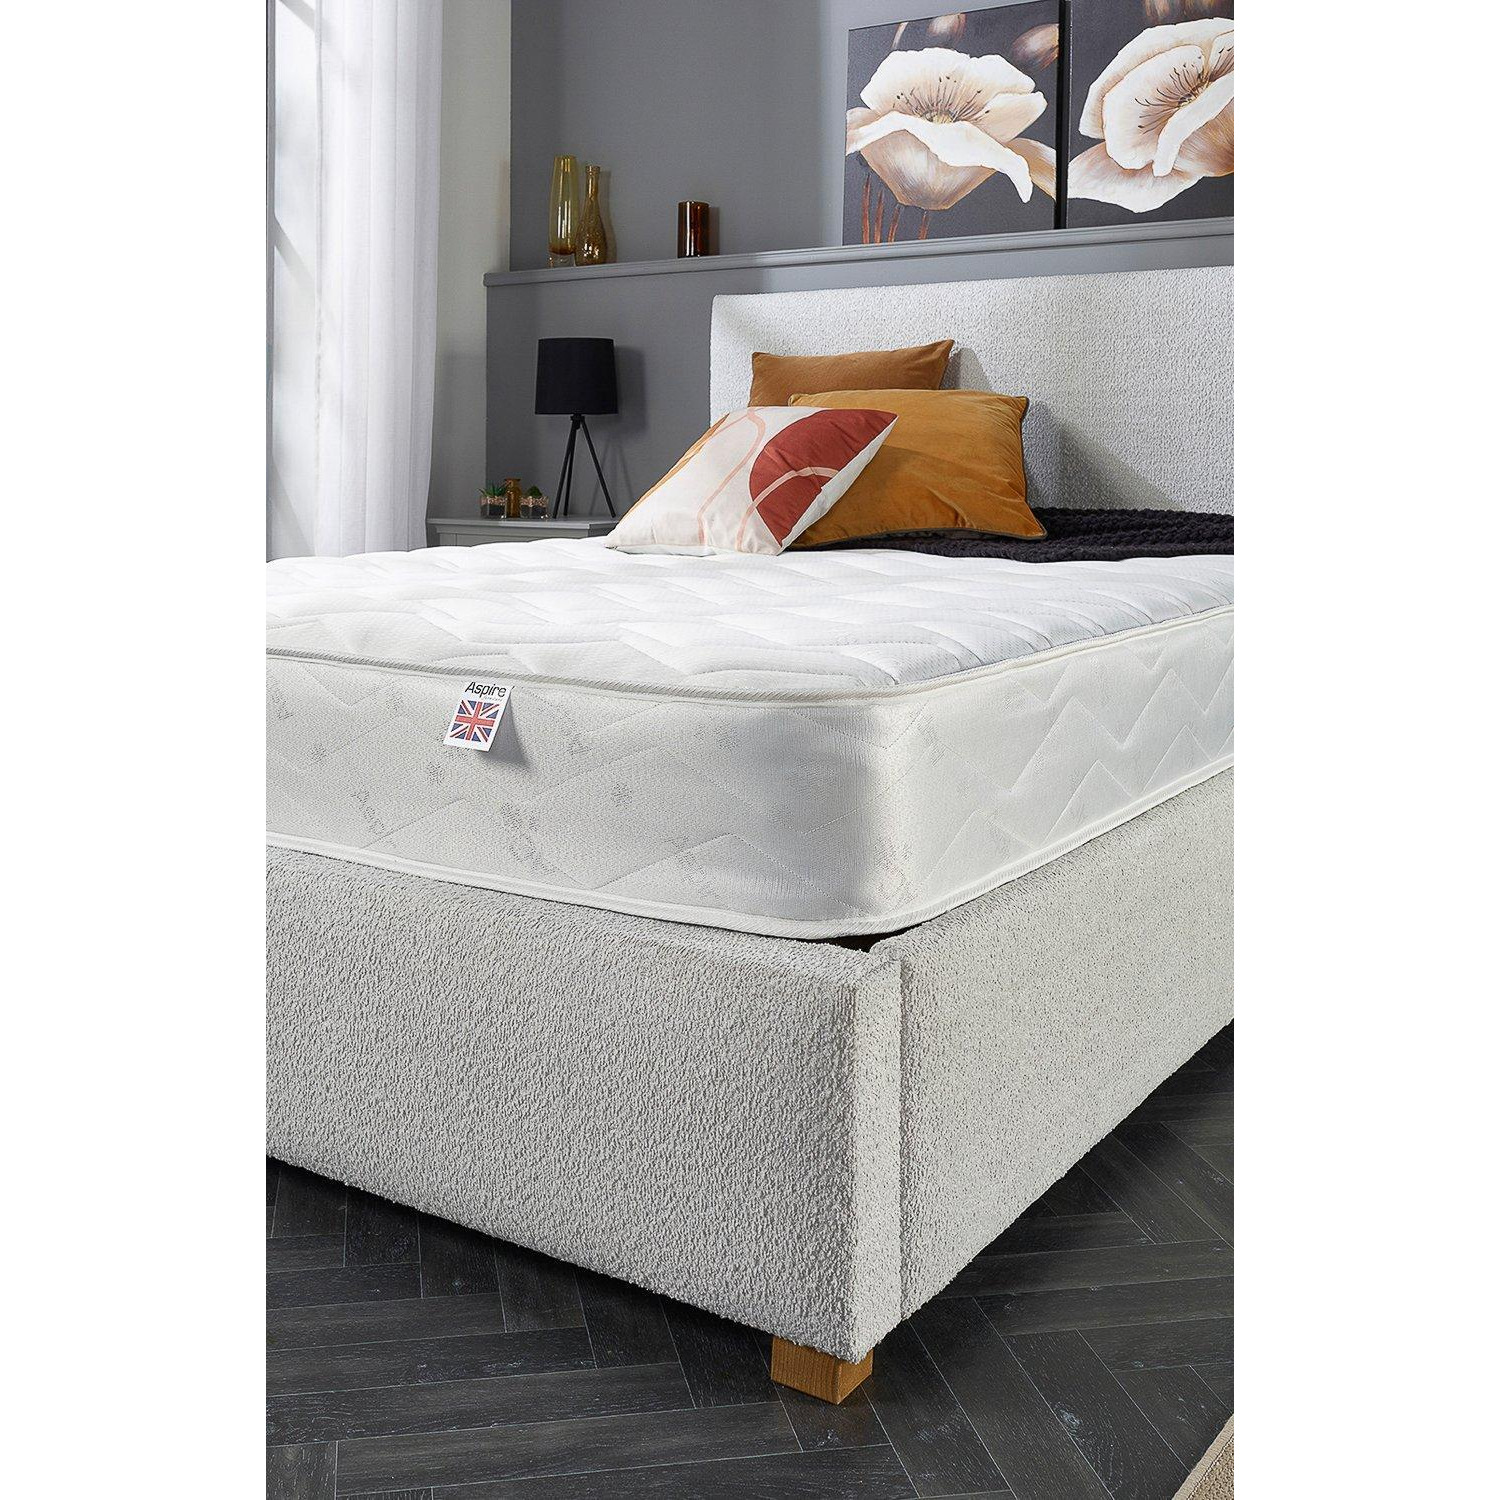 "Aspire Double Comfort 8"" Memory Rolled Mattress" - image 1